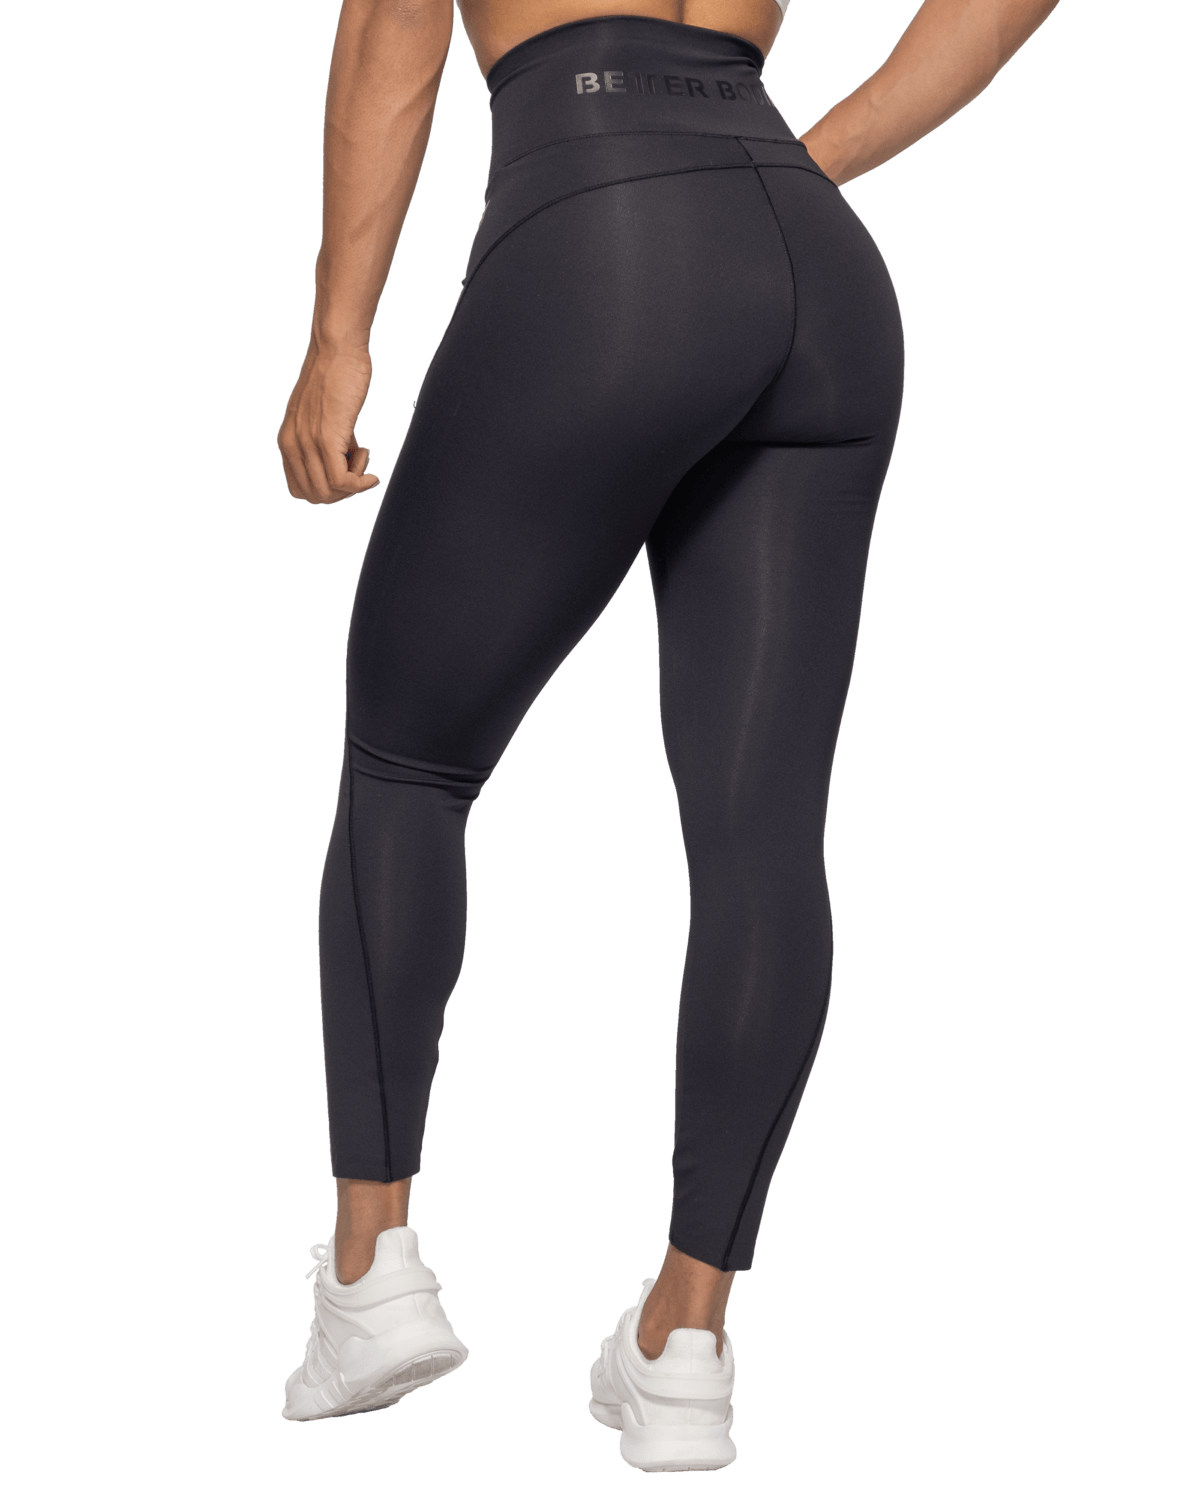 https://www.tights.no/wp-content/uploads/sites/7/2020/03/111014999_3-1200x1500.png